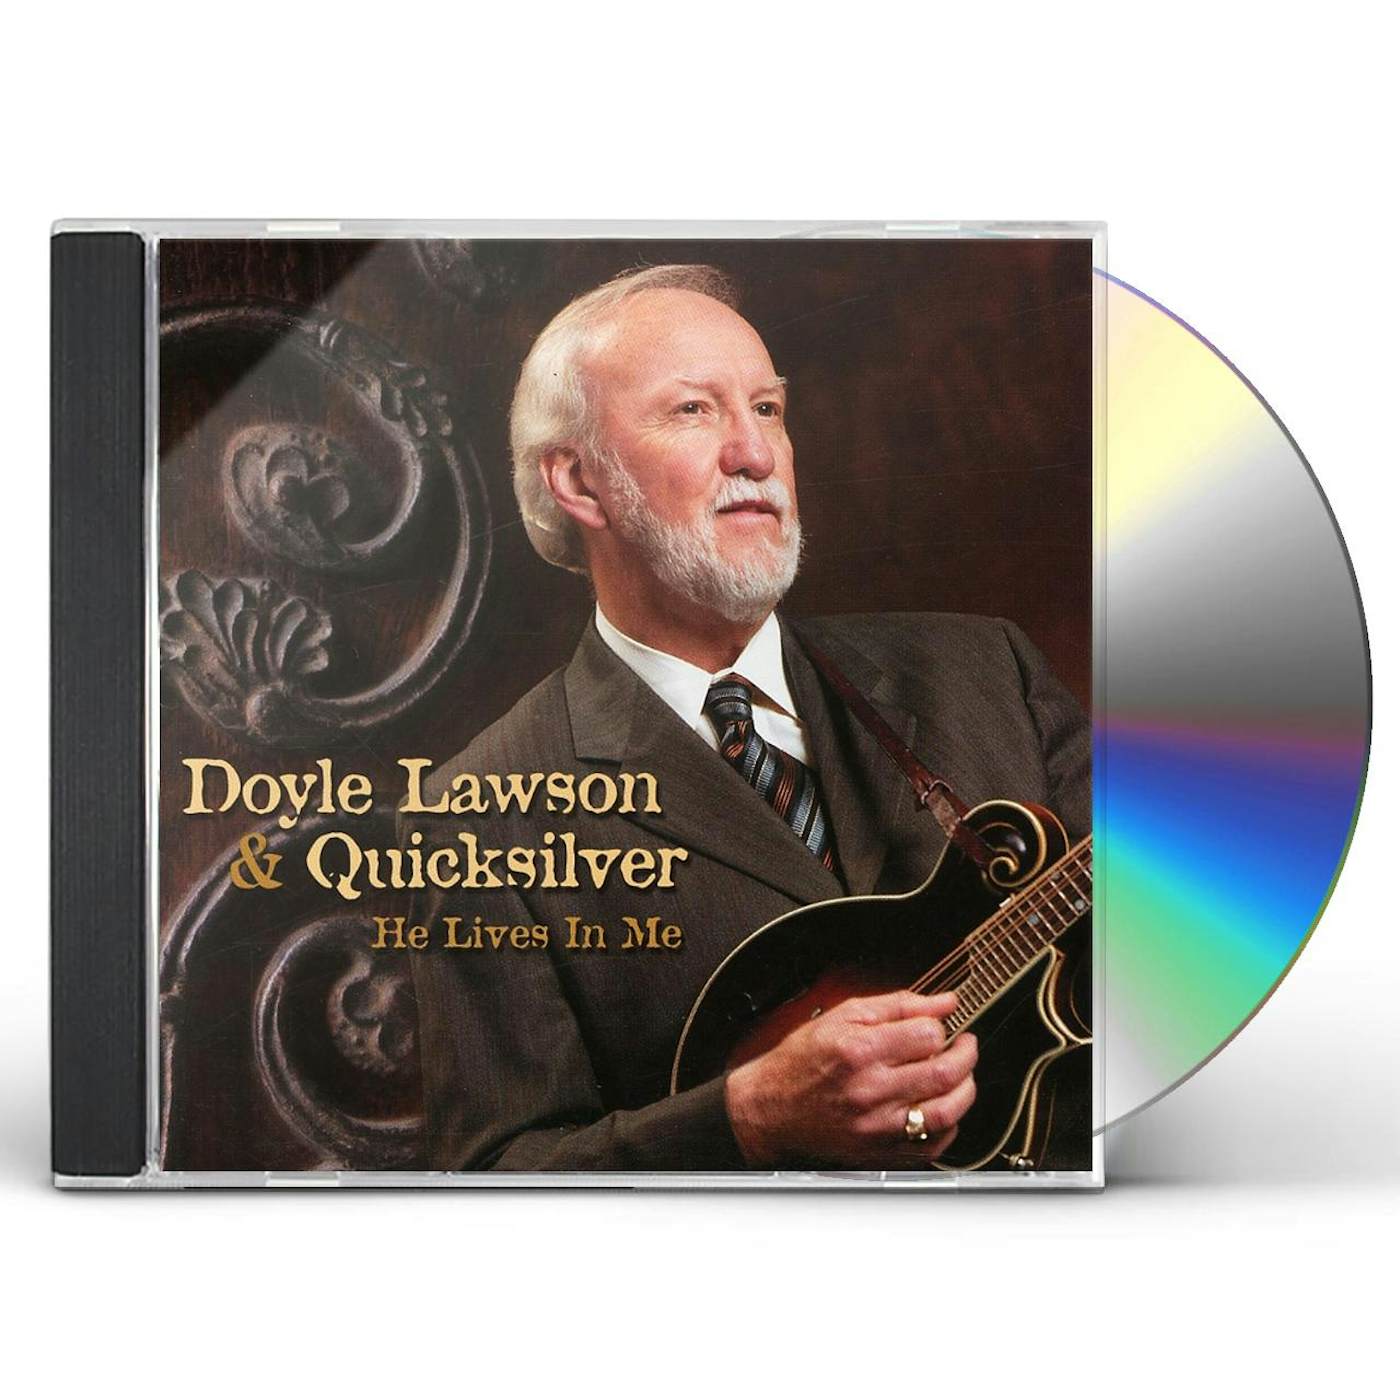 Doyle Lawson & Quicksilver HE LIVES IN ME CD